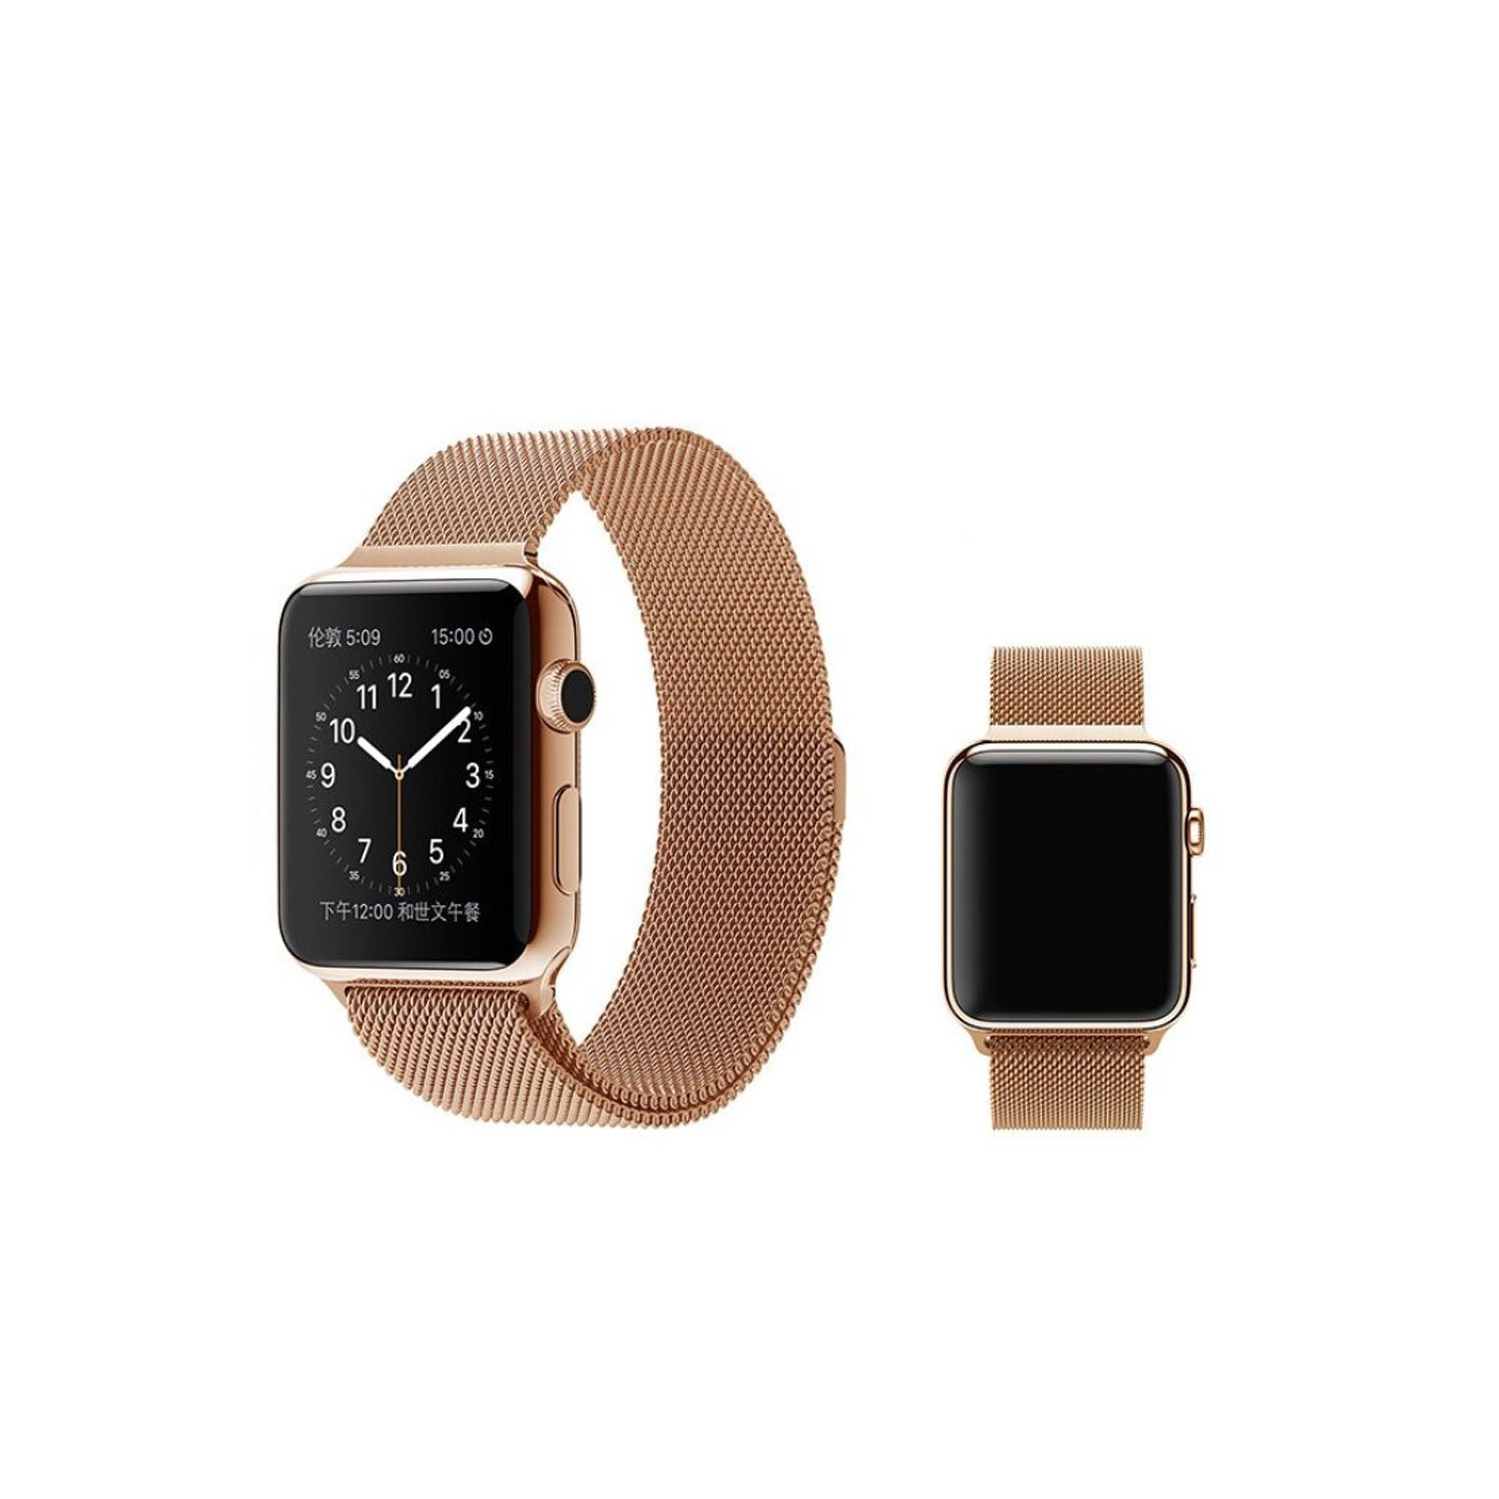 Modern Milanese Magnetic Closure iWatch Band Bracelet Strap Loop for Apple Watch Sport Edition Series 1/2/3/4/5/6/7/8 42mm,44mm,45mm - Rose Gold